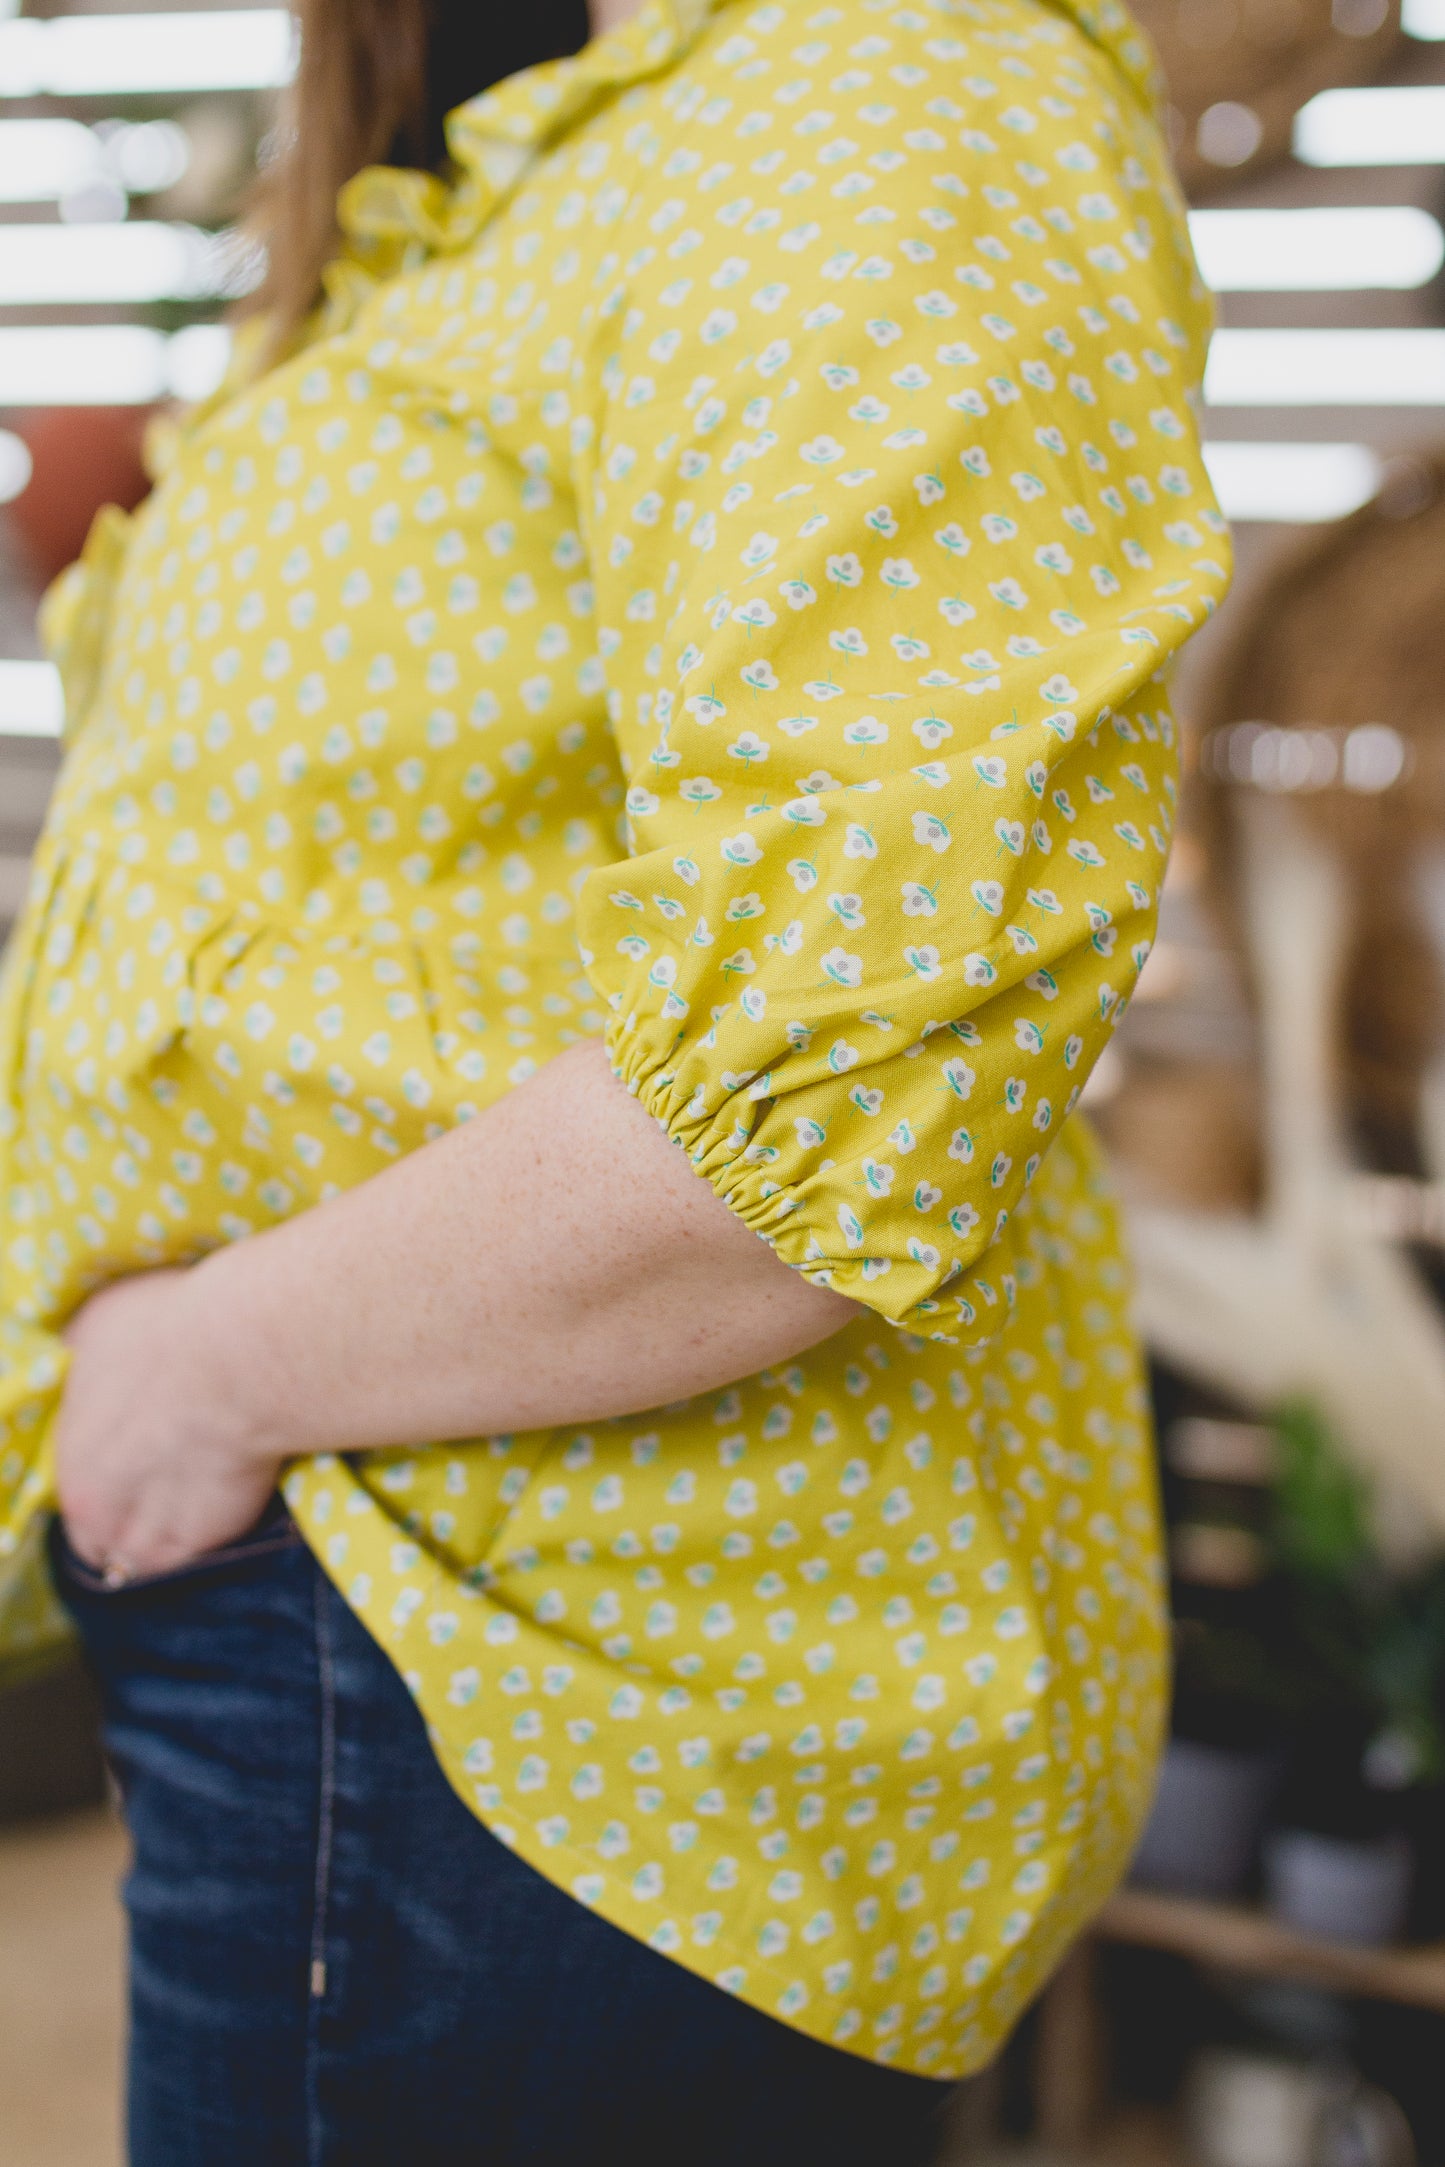 Spring Blouse - Sunny Chartreuse